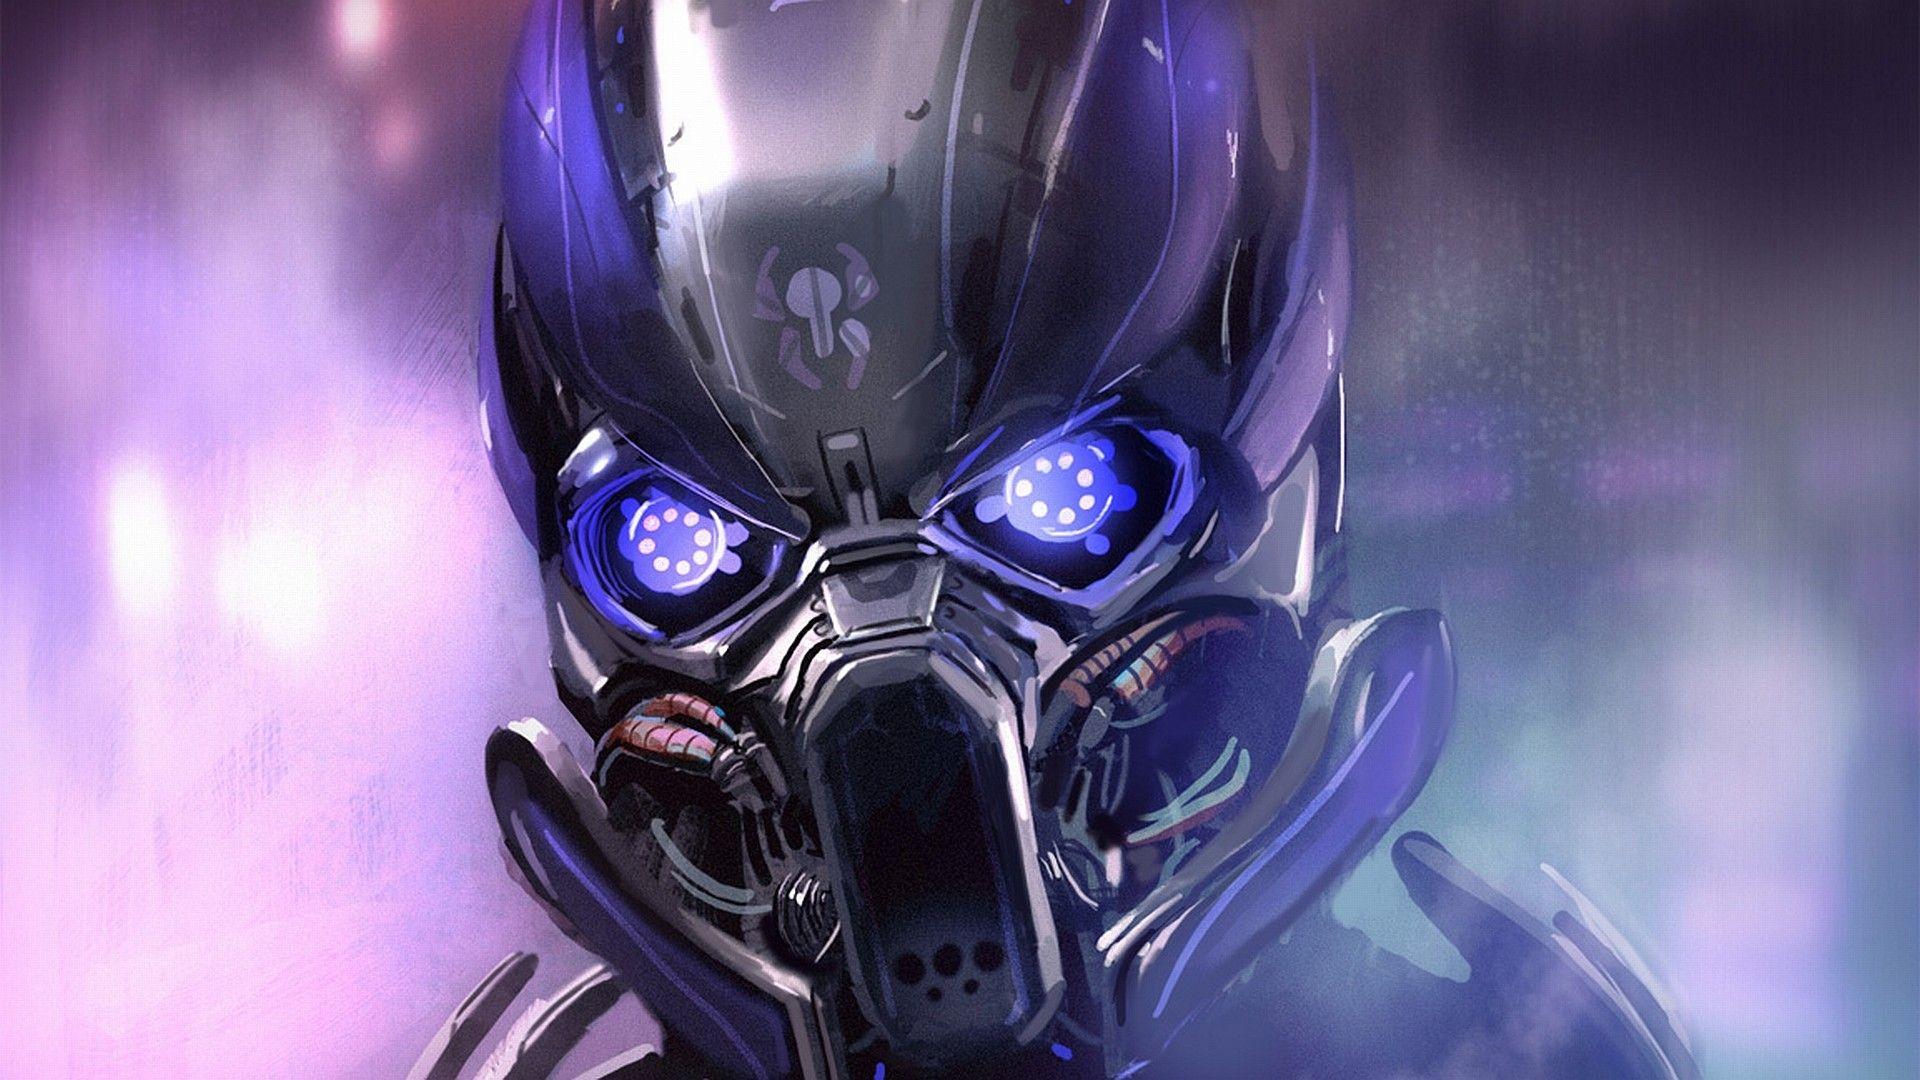 Download the Angry Cyborg Wallpaper, Angry Cyborg iPhone Wallpaper